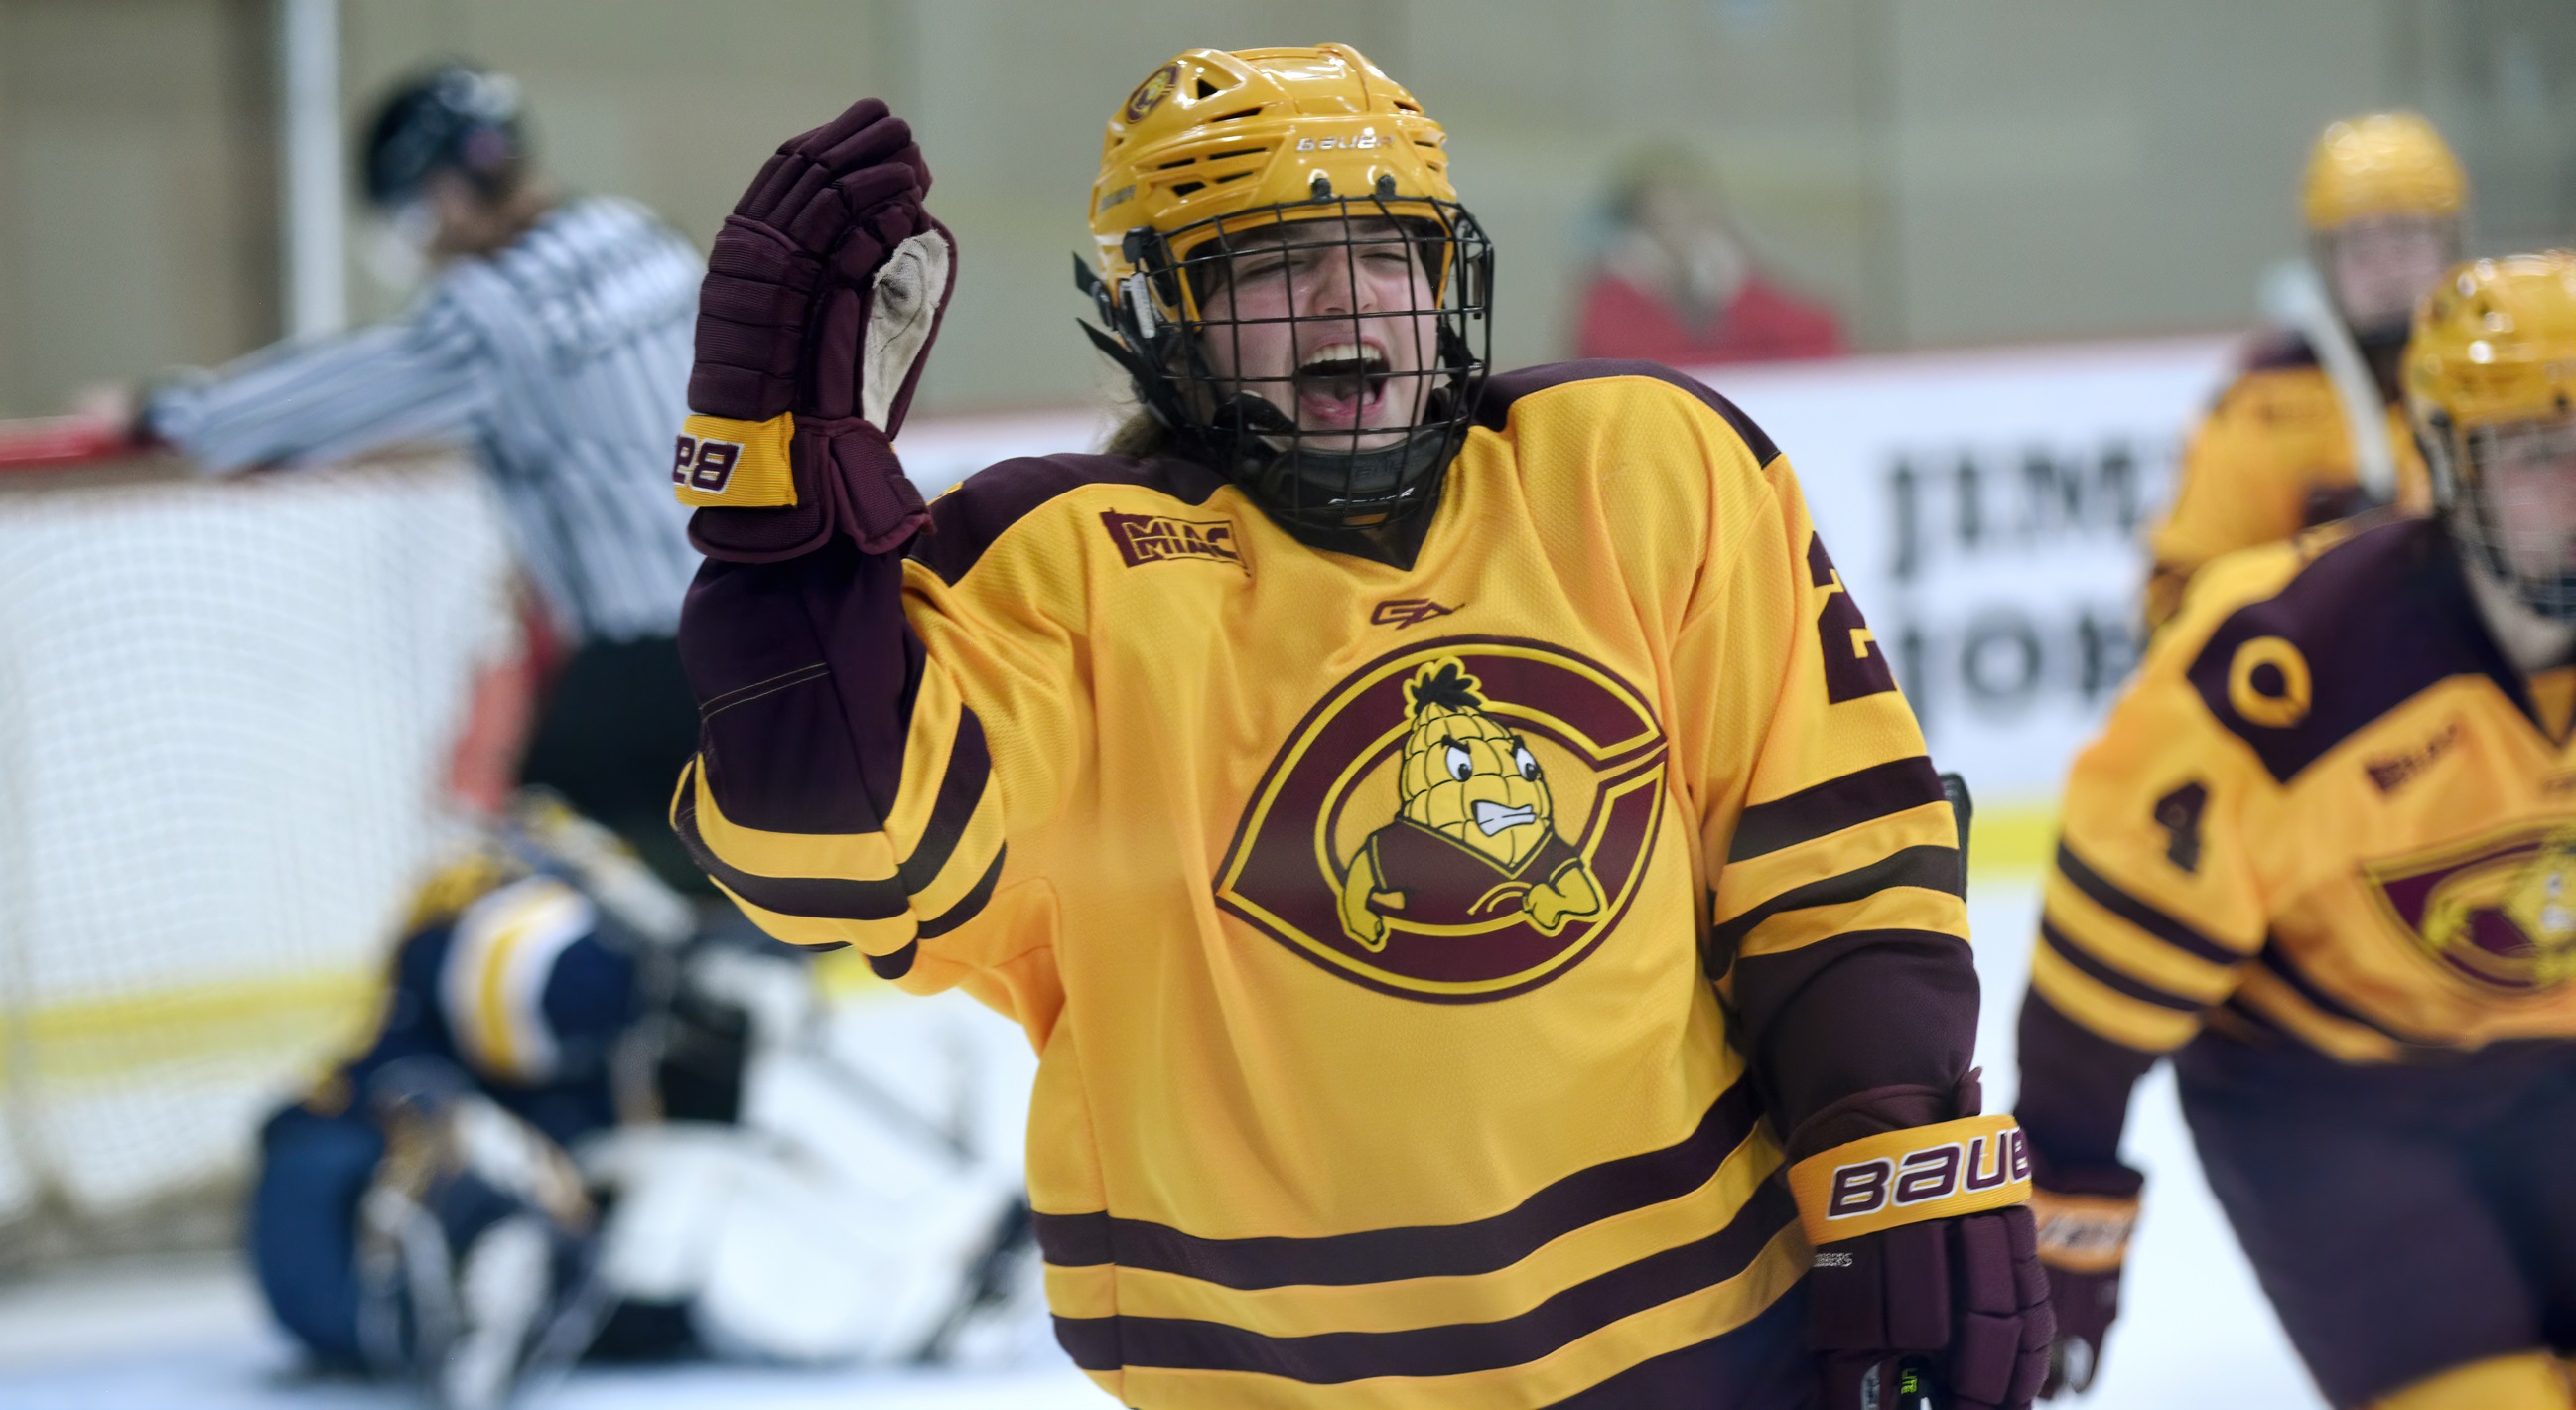 Jerica Friese celebrates her goal in the second period of the Cobbers' 3-2 OT win over #2 UW-Eau Claire. Friese had all three goals for CC.